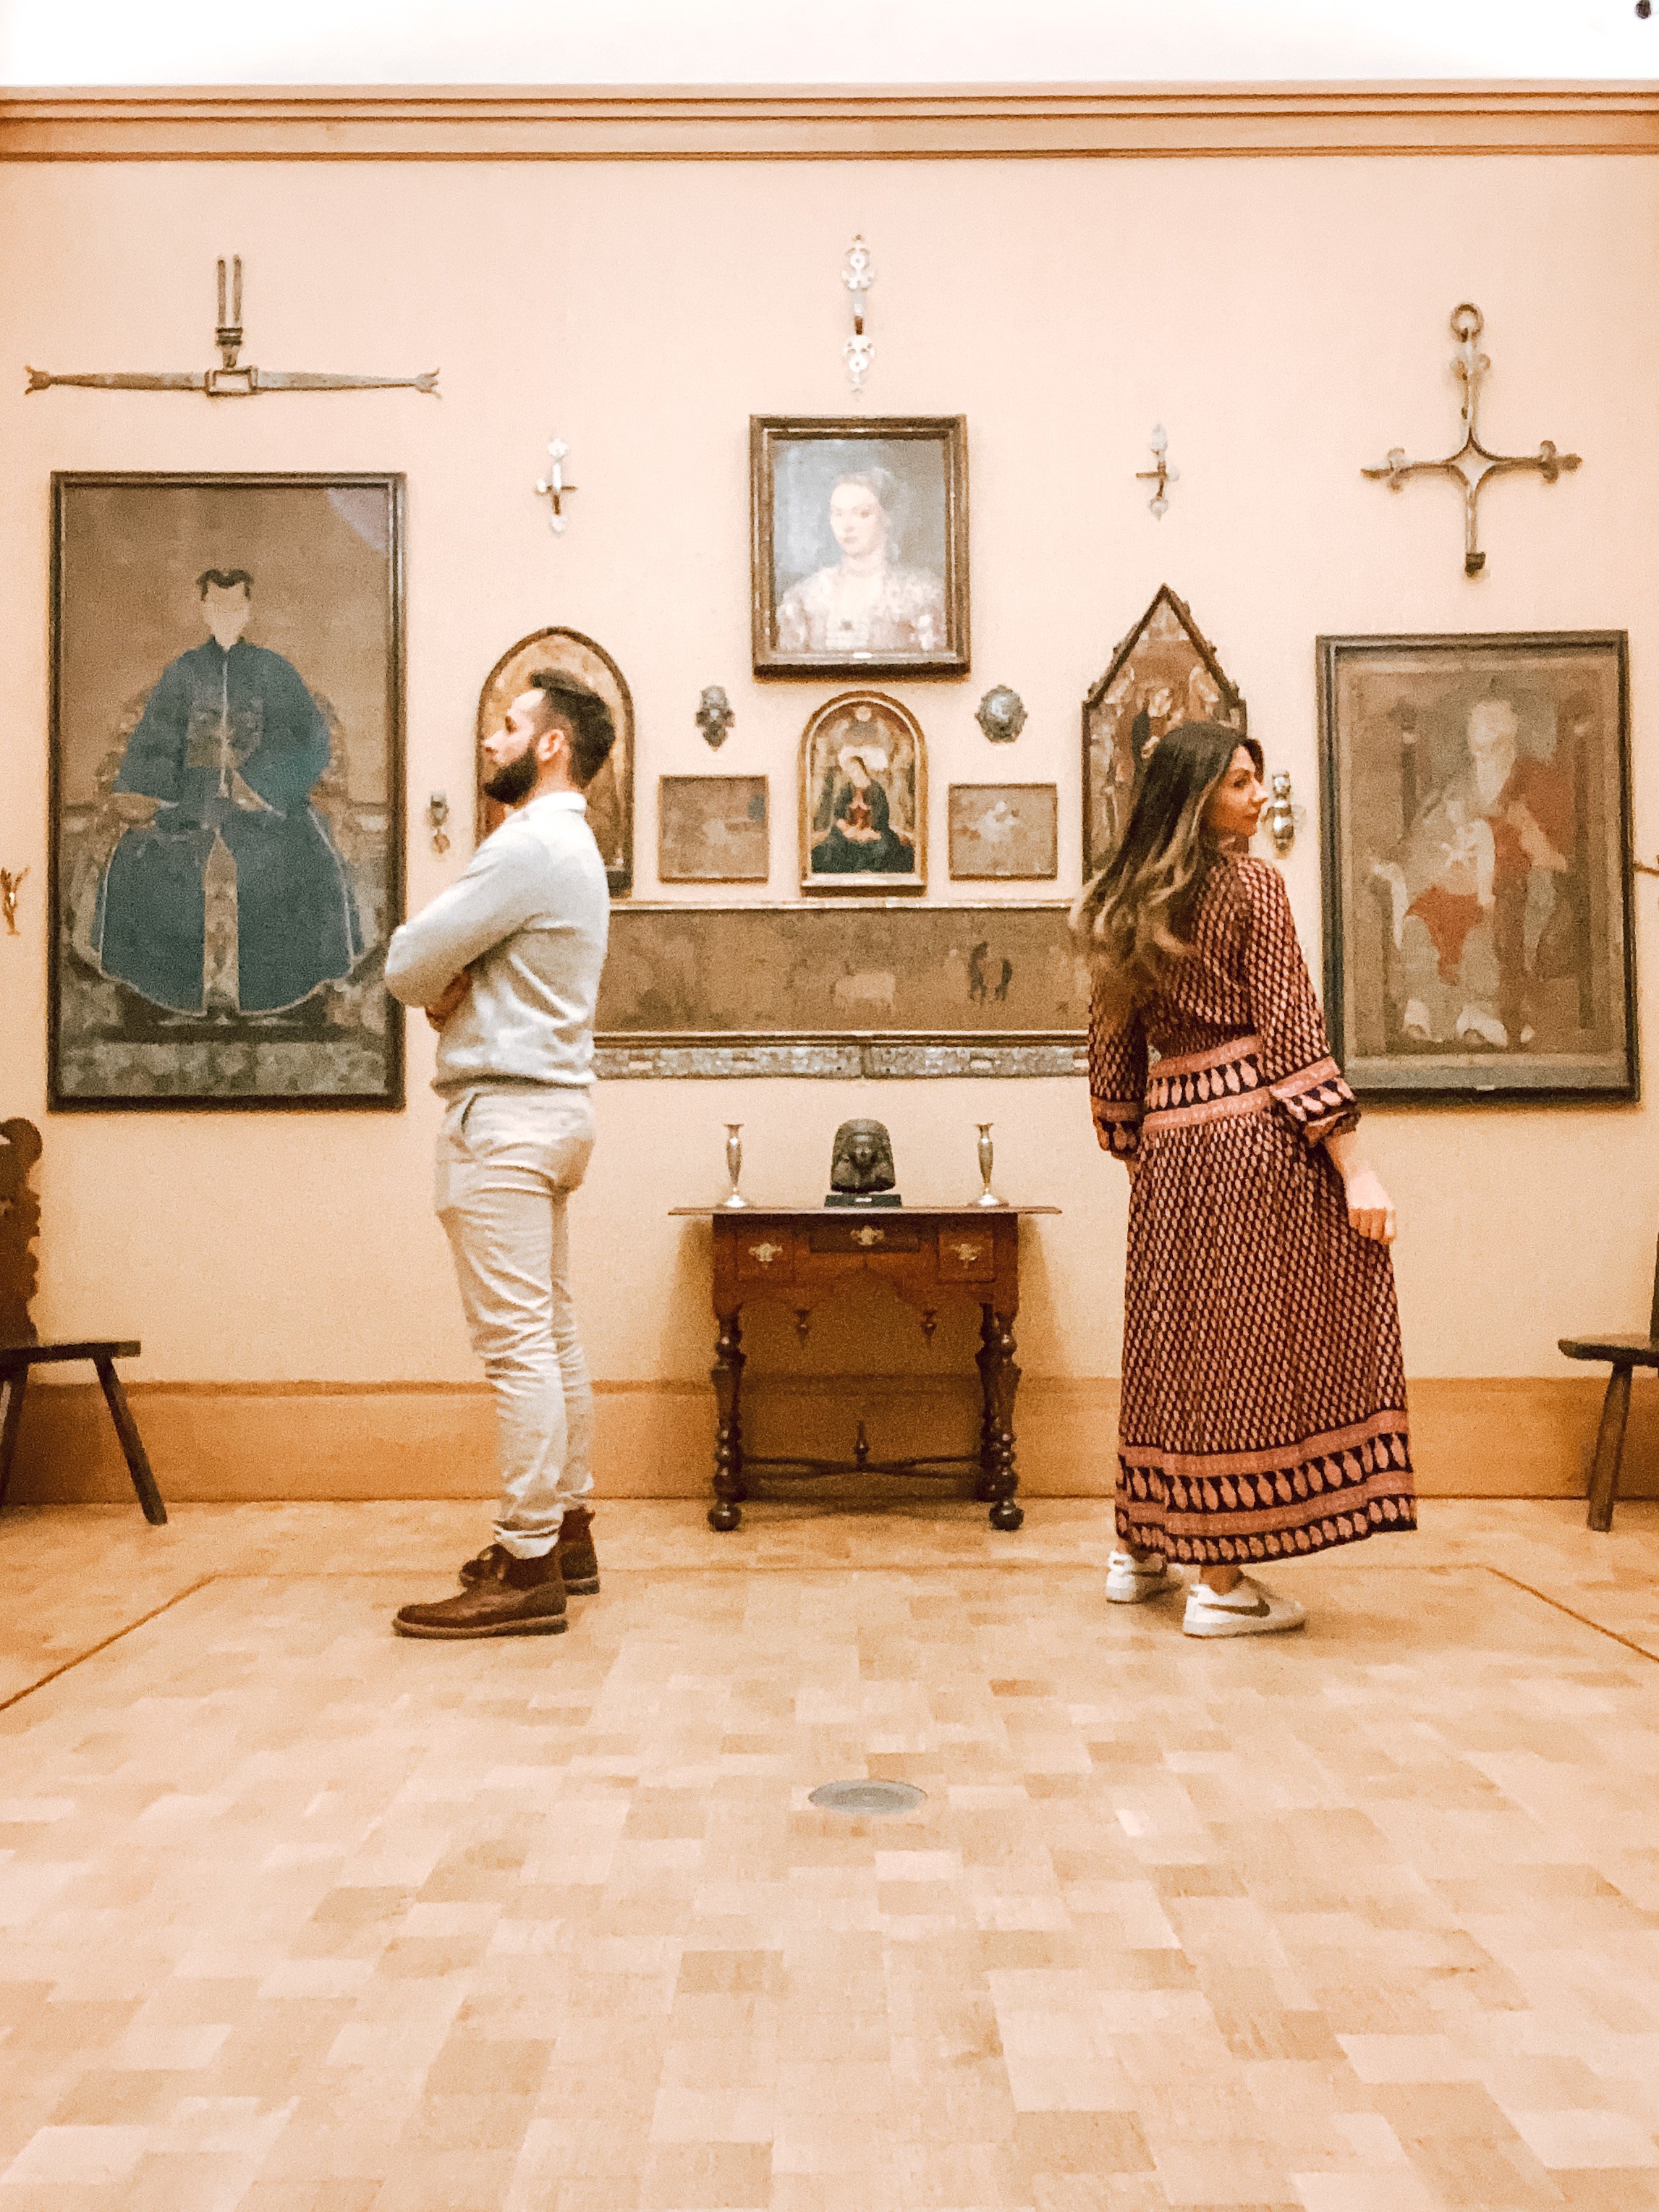 Lifestyle Blogger Chocolate and Lace shares her visit to the Barnes Foundation in Philadelphia, PA.